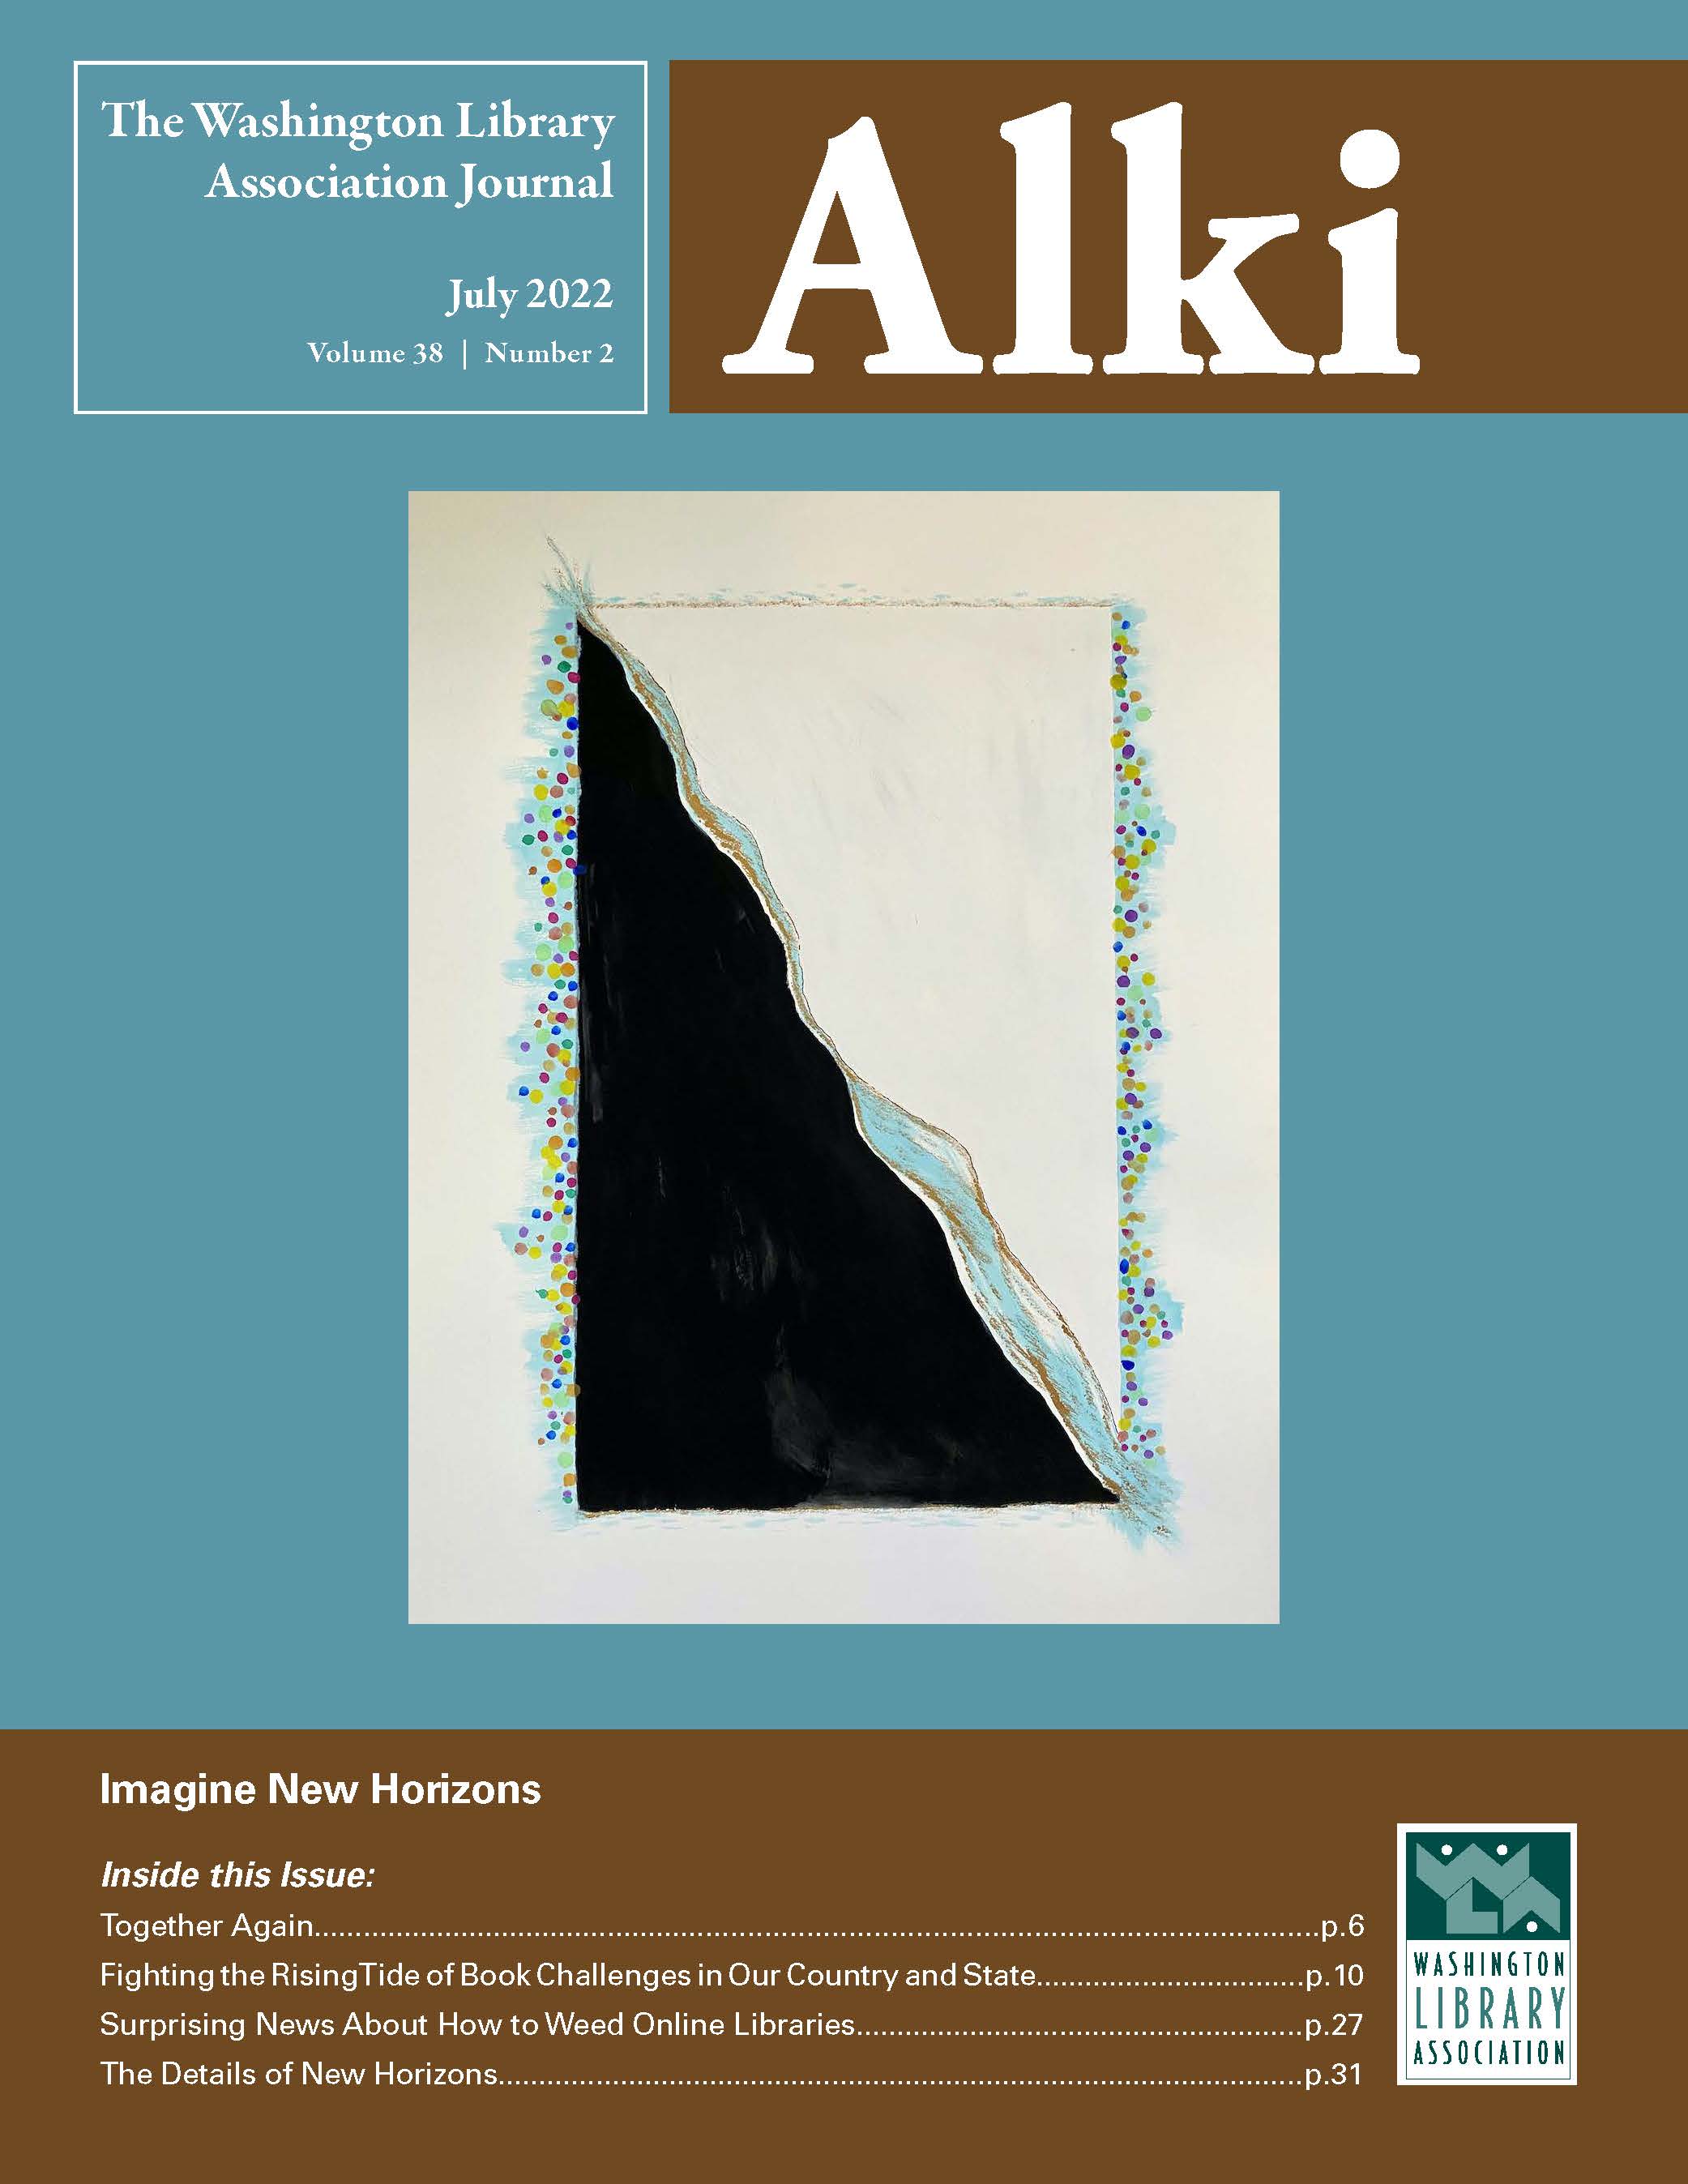 Cover image for July 2022 issue of Alki. The theme is Imagine New Horizons. The cover is sky blue with brown. he cover art is a division of black and white with colored dots.